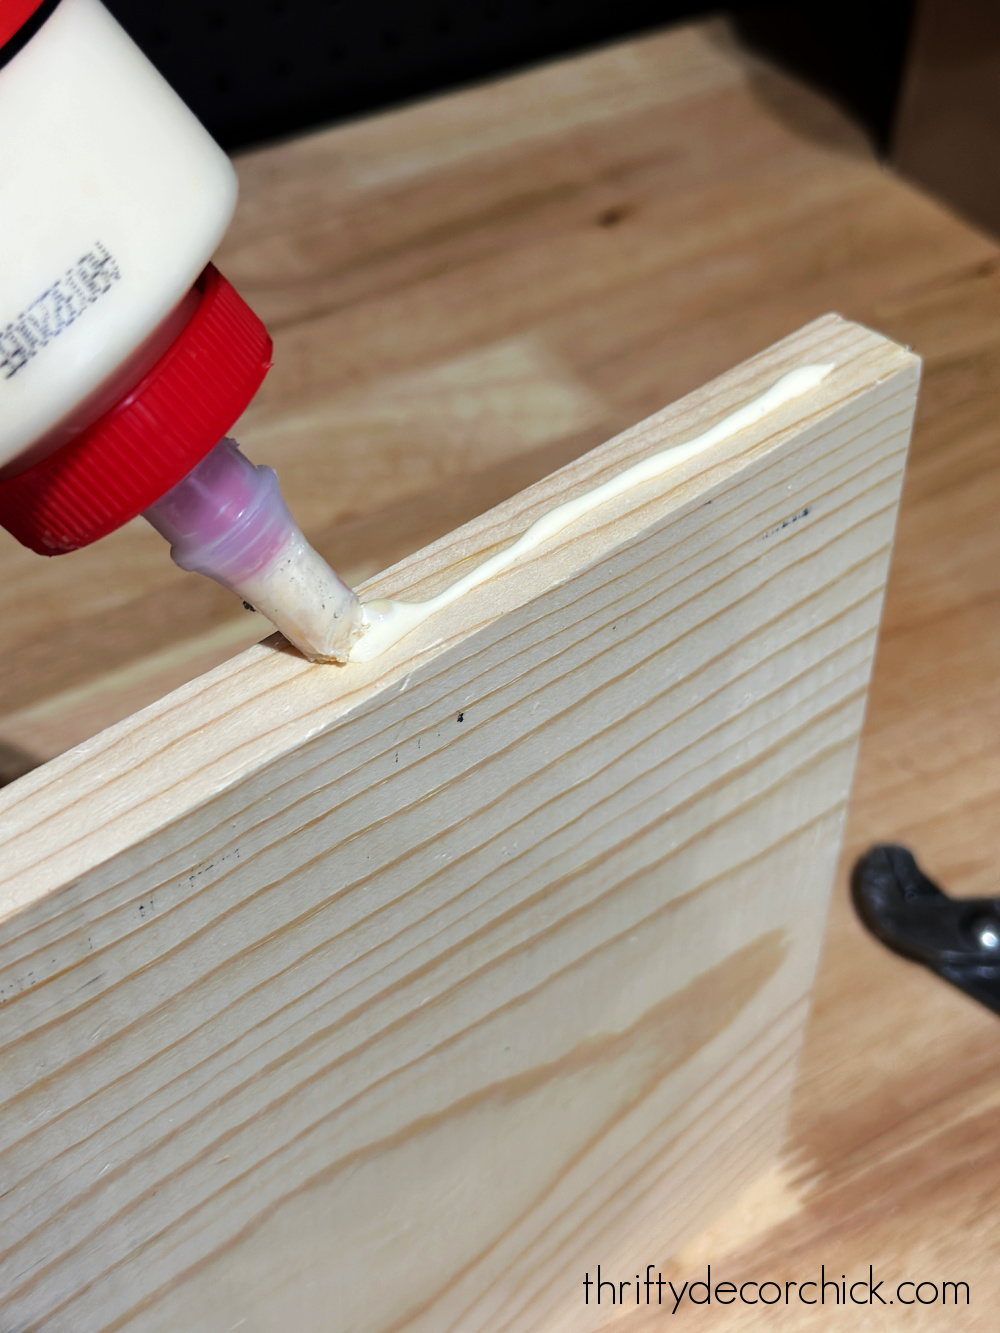 Wood glue on the side of the wood